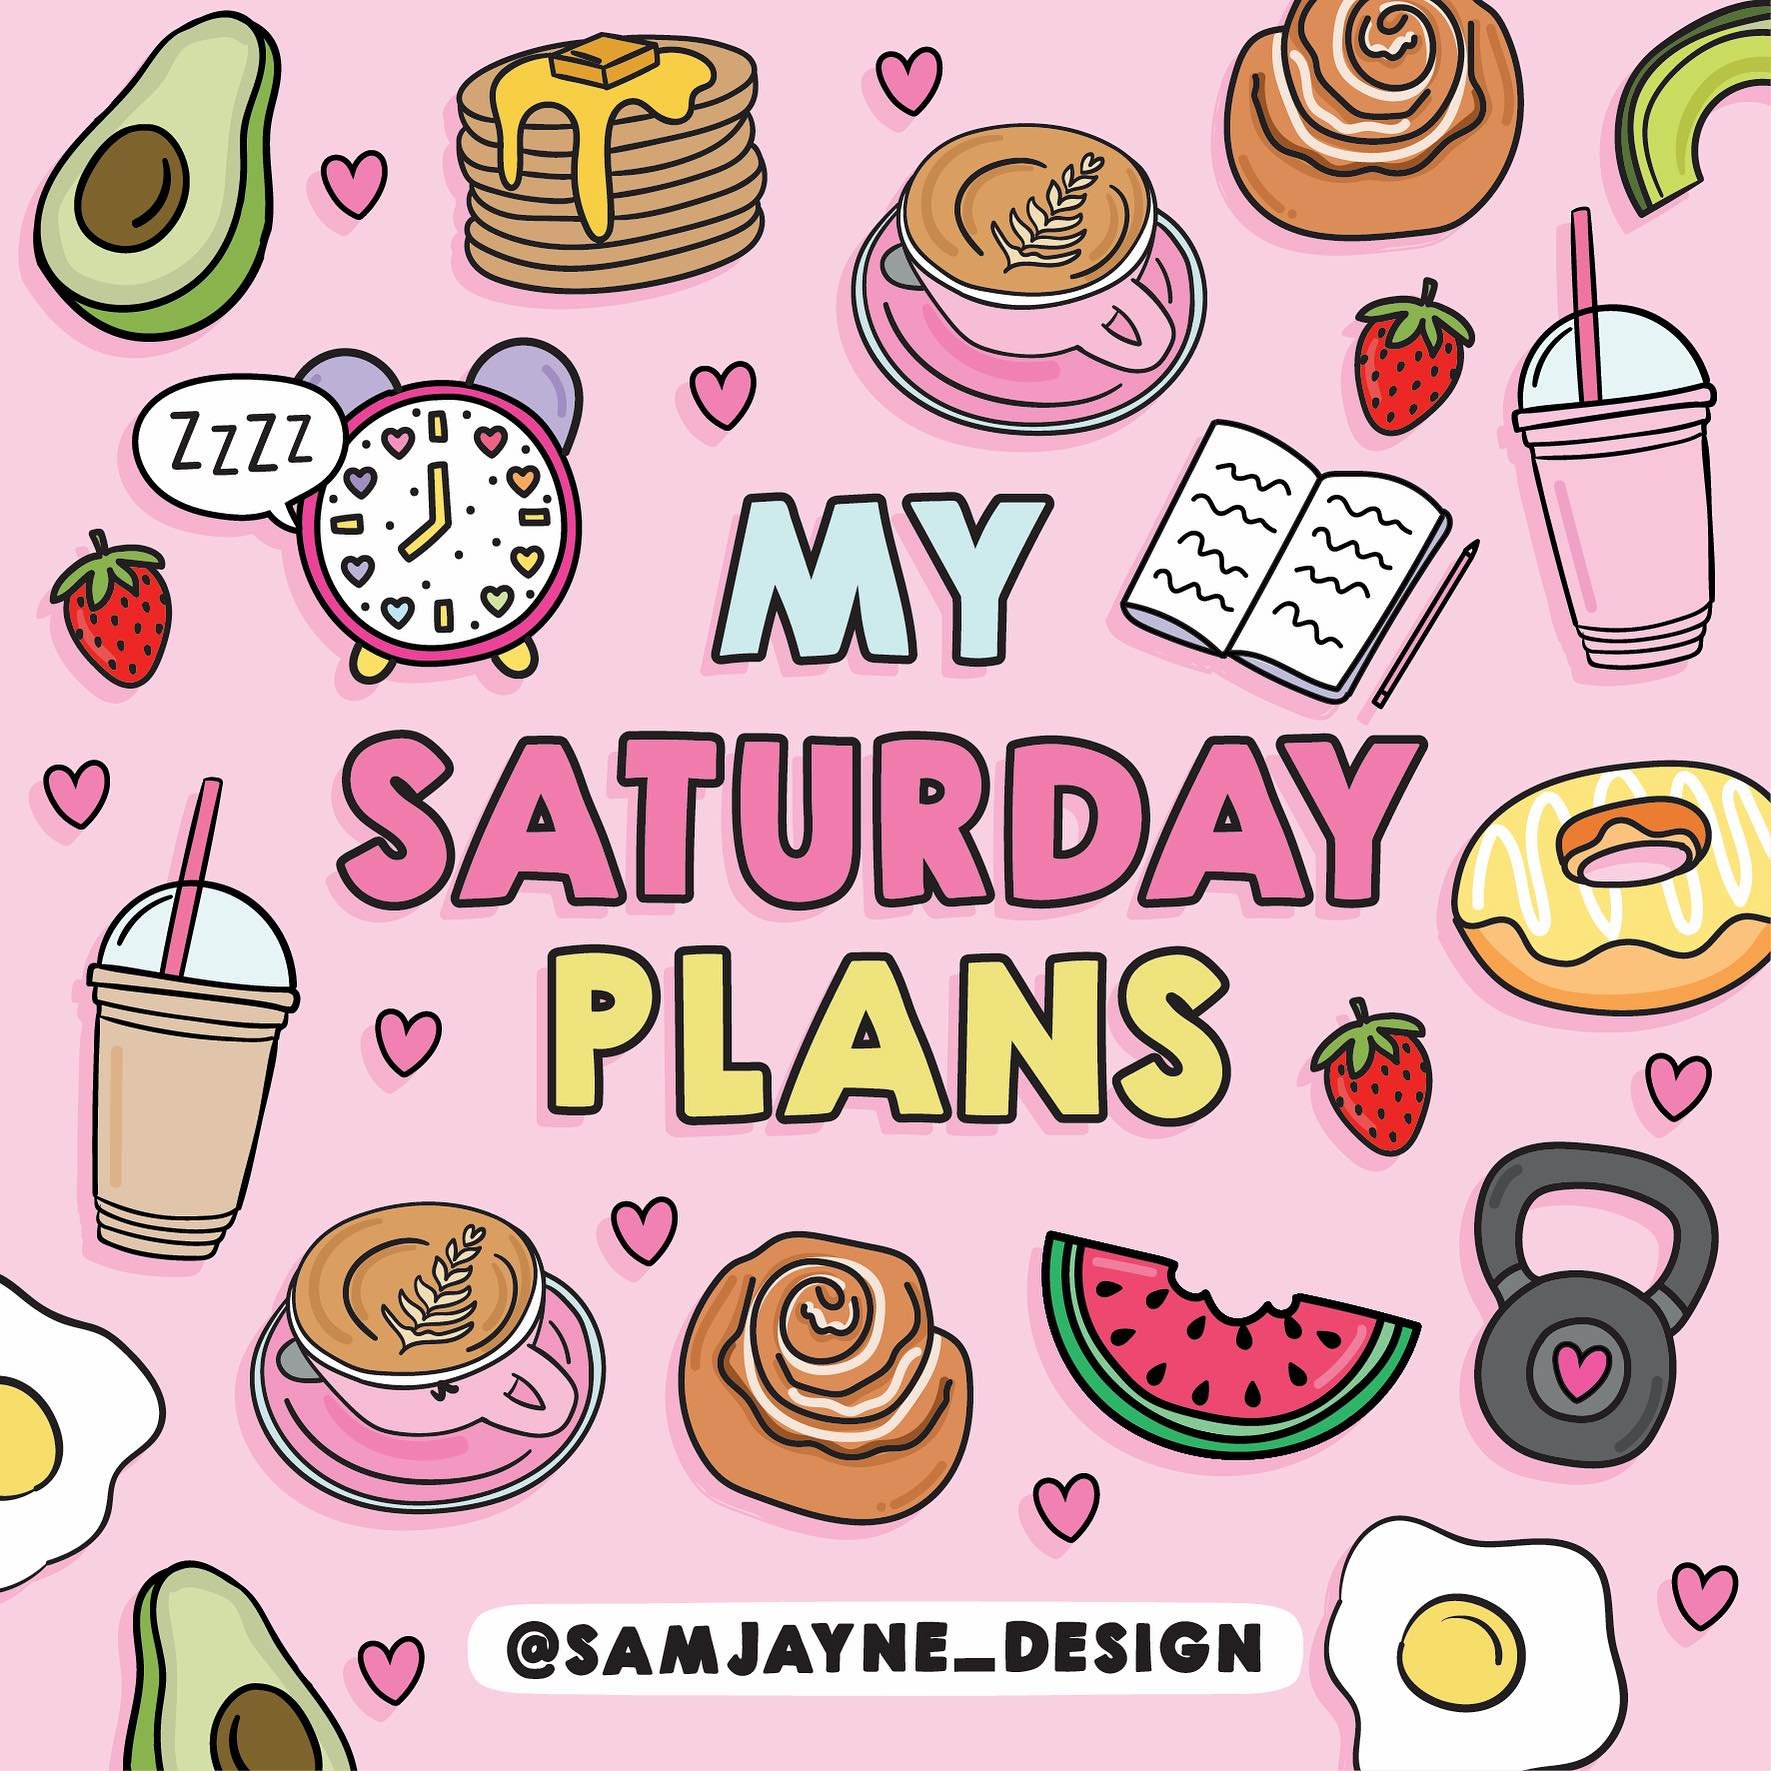 I&rsquo;d love to but I&rsquo;ve got plans with myself today 😊 What are you up to this weekend? 💖

#saturdayplans #saturdayselfcare #cuteartwork #cuteartstyle #goodvibesquotes